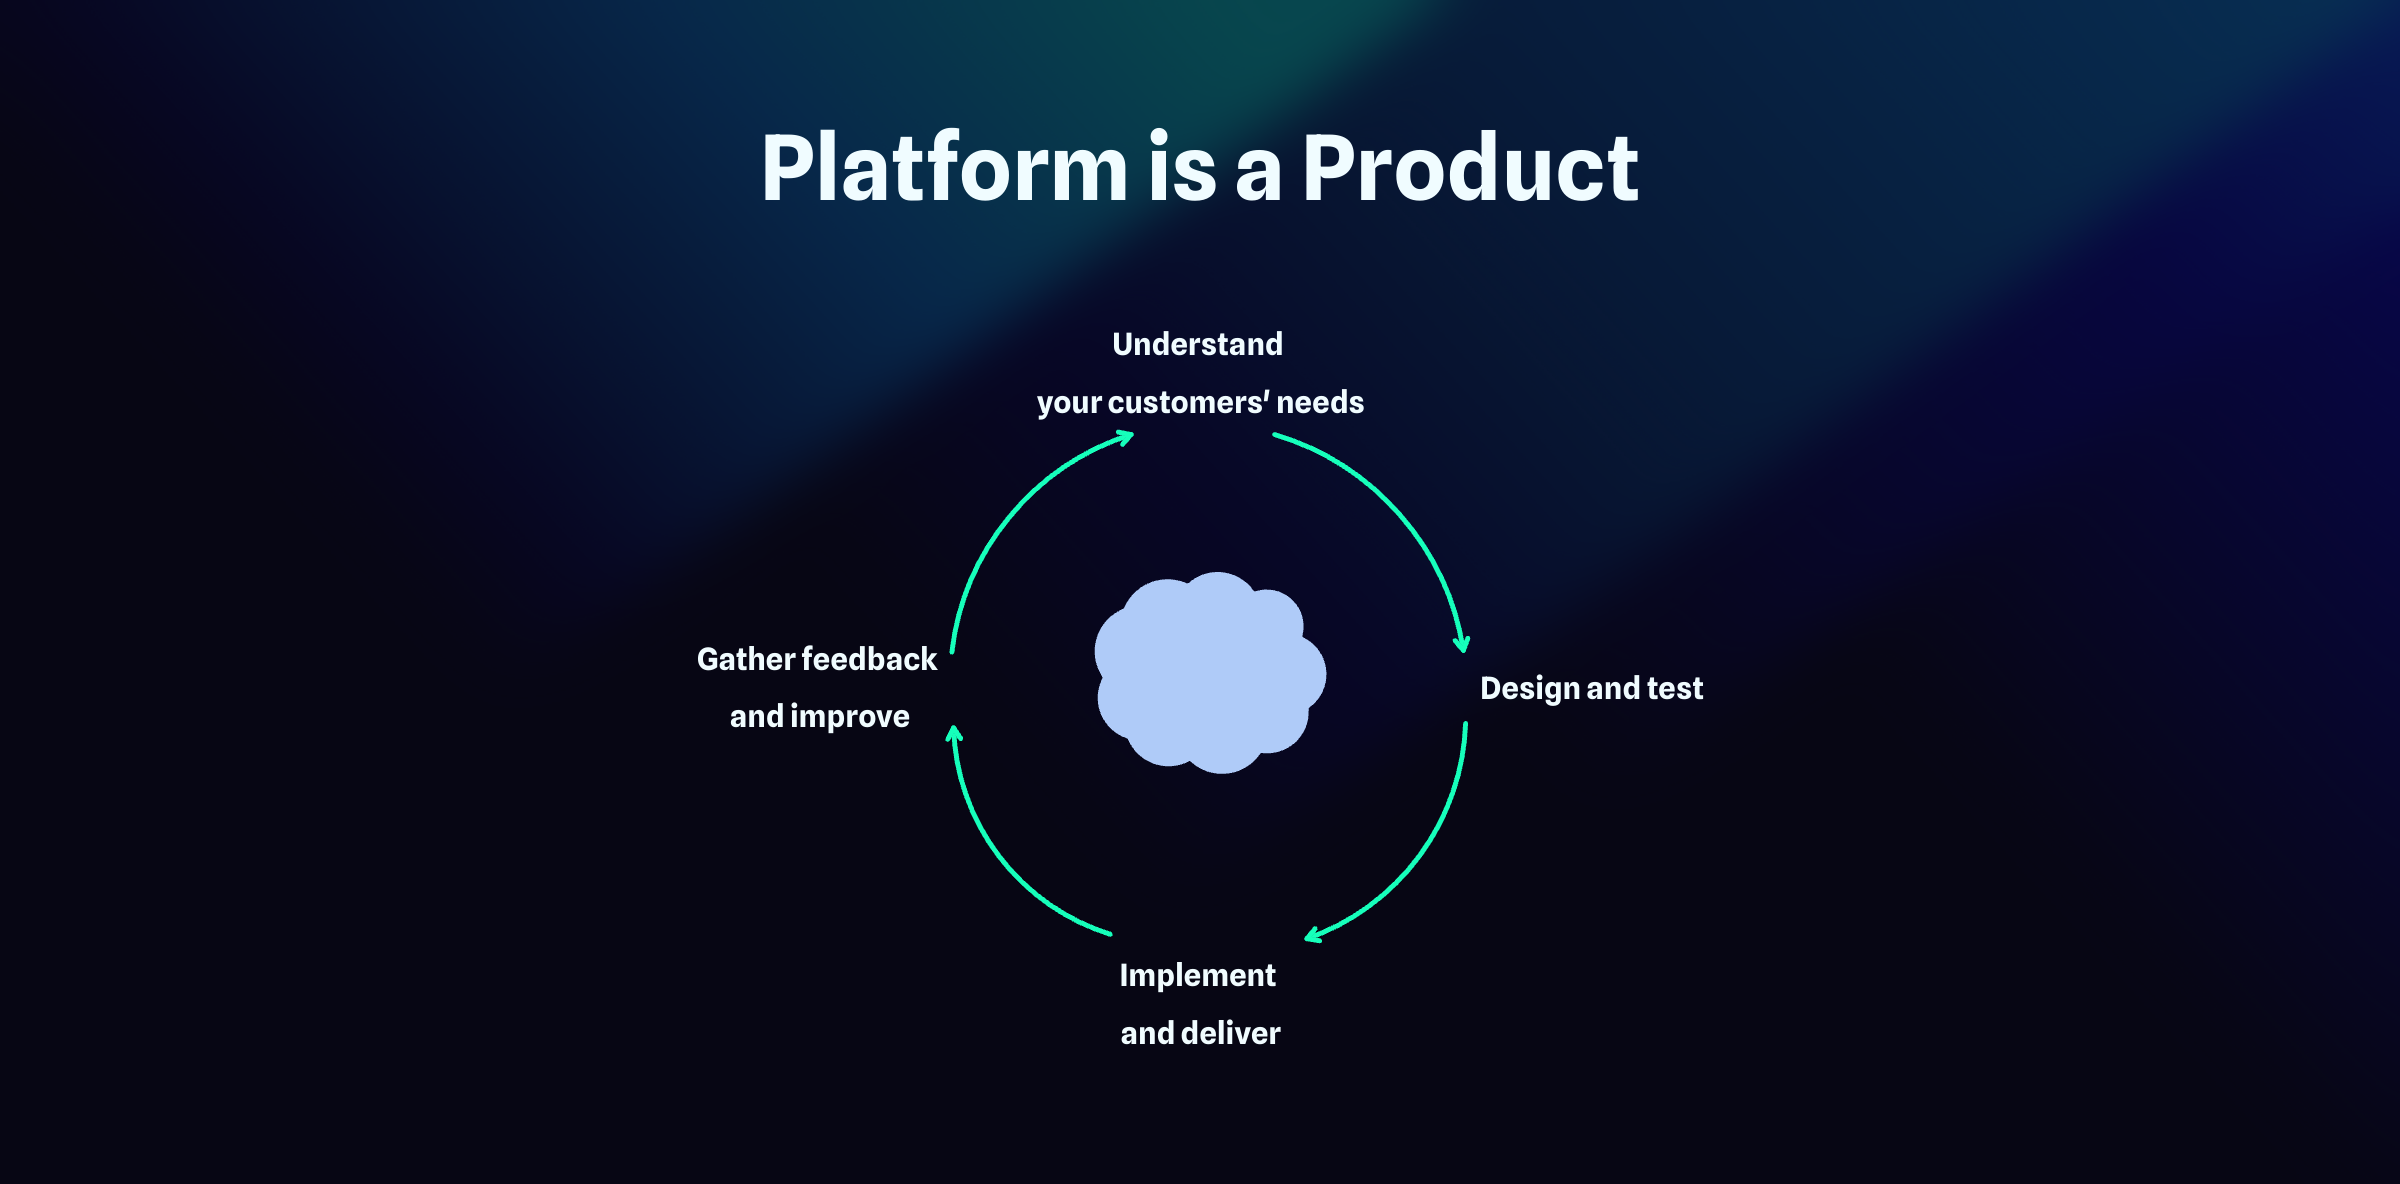 Platform as a Product